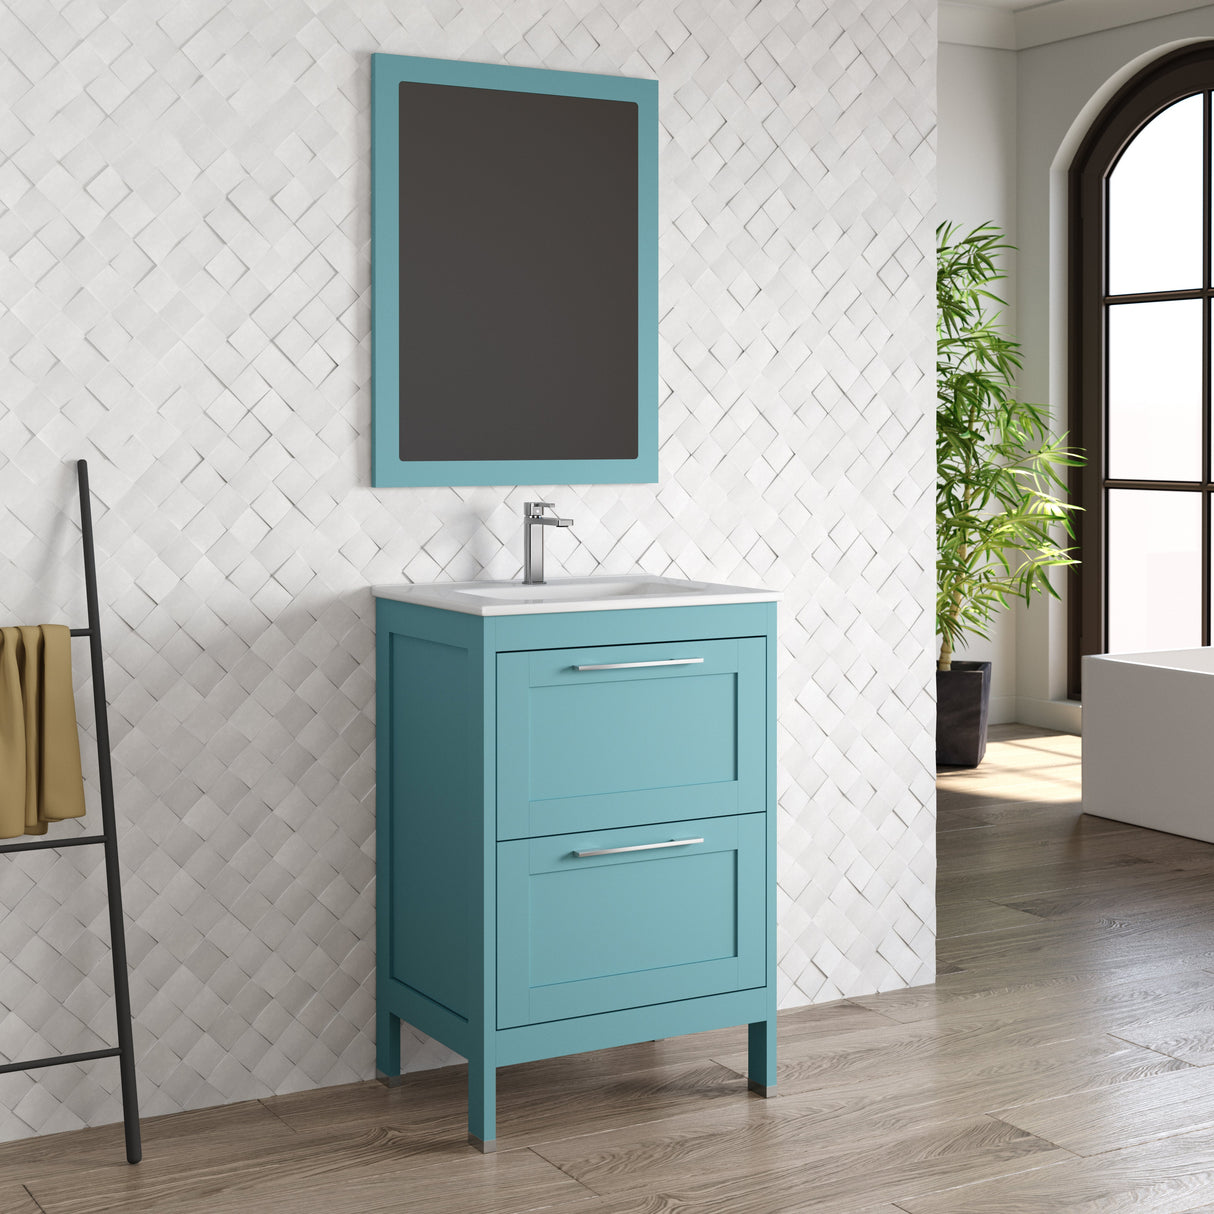 DAX Lakeside Engineered Wood and Porcelain Single Vanity with Onix Basin, 24", Deep Blue DAX-LAKE012419-ONX